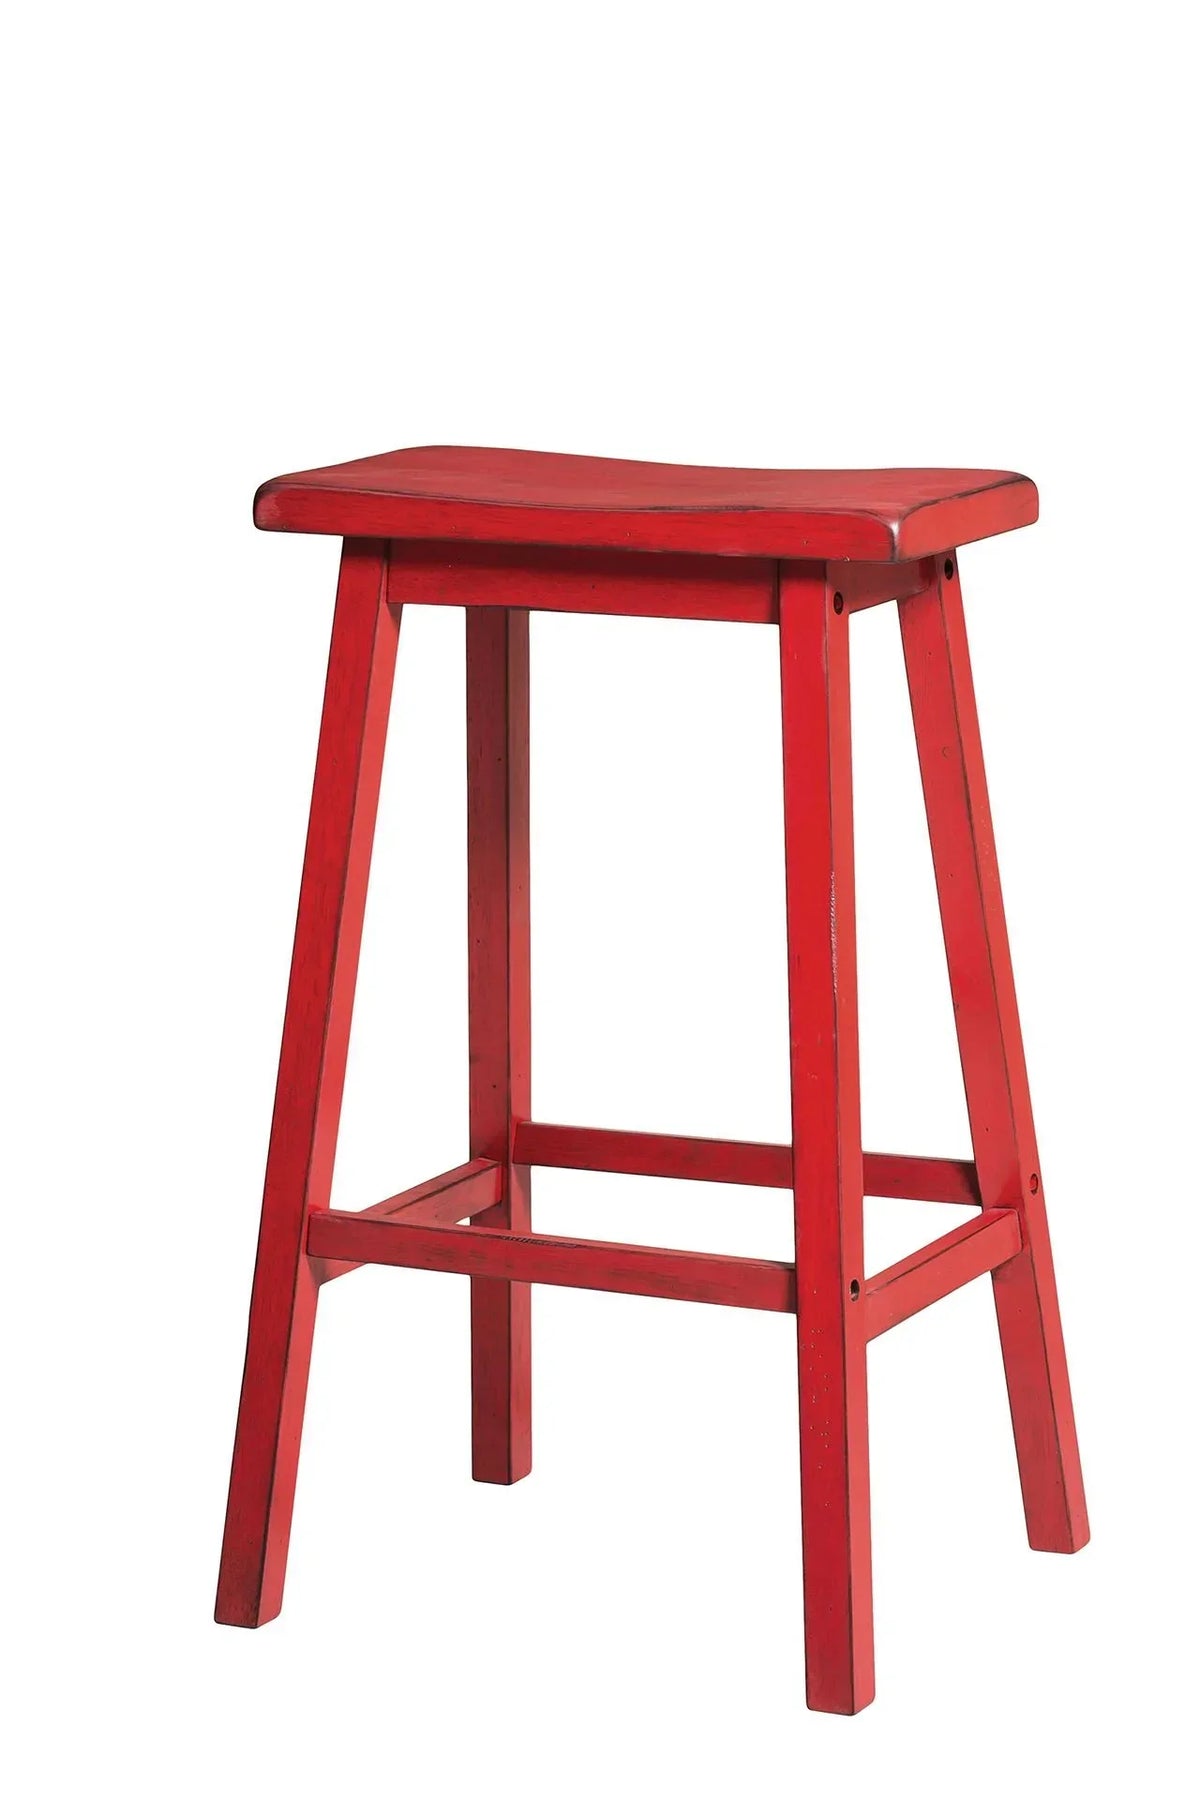 Gaucho Antique Red Bar Stool Model 96650 By ACME Furniture